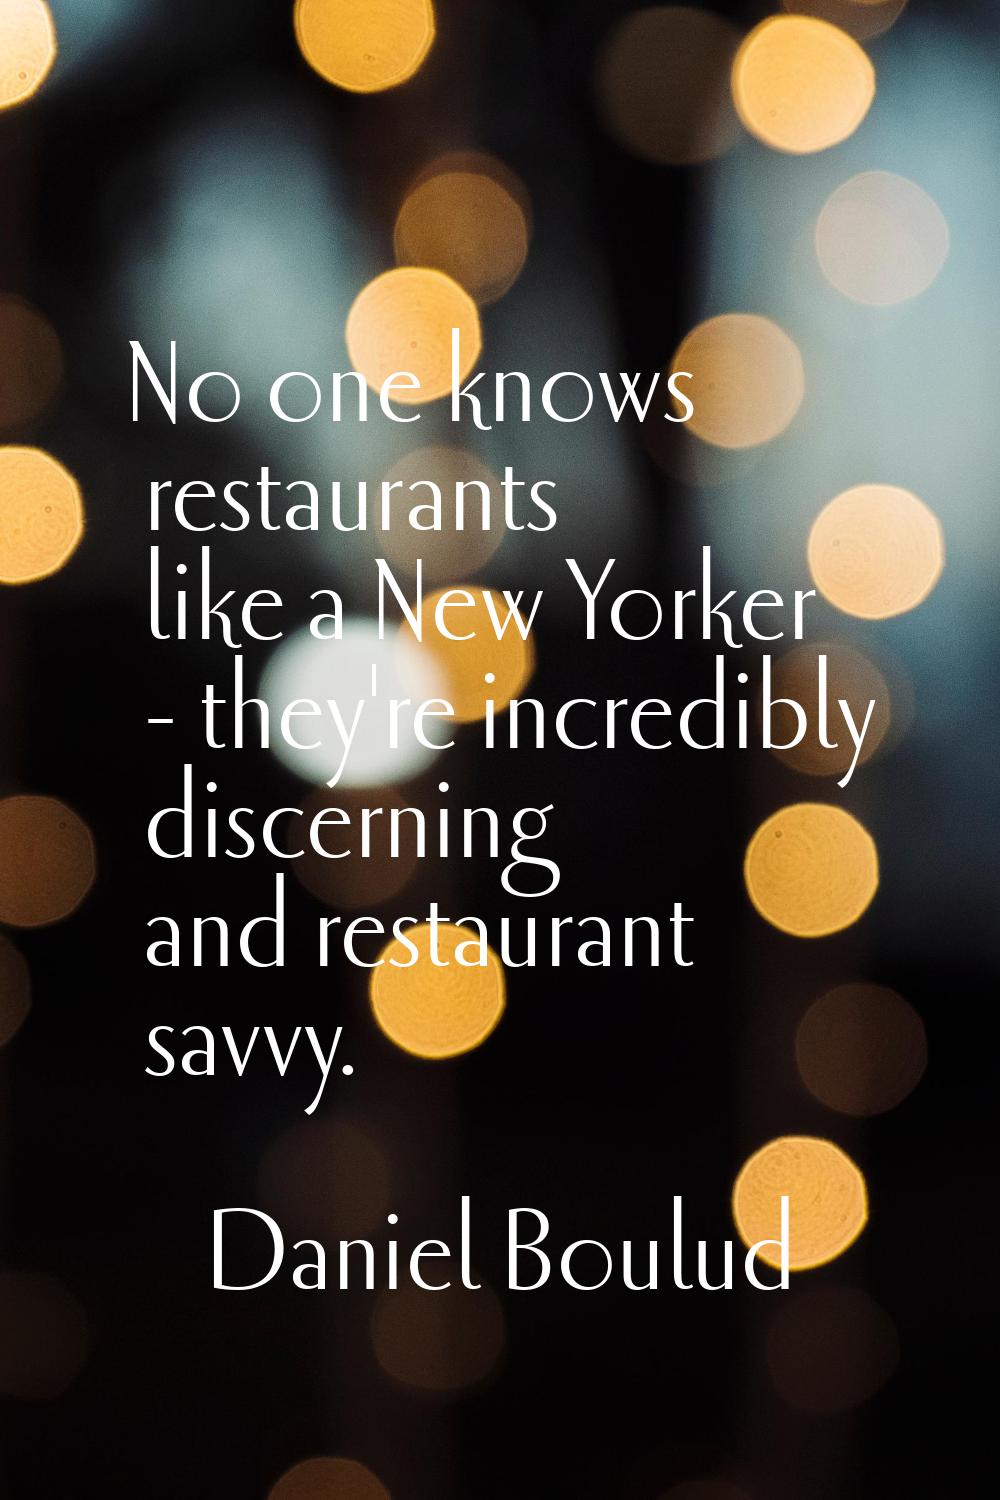 No one knows restaurants like a New Yorker - they're incredibly discerning and restaurant savvy.